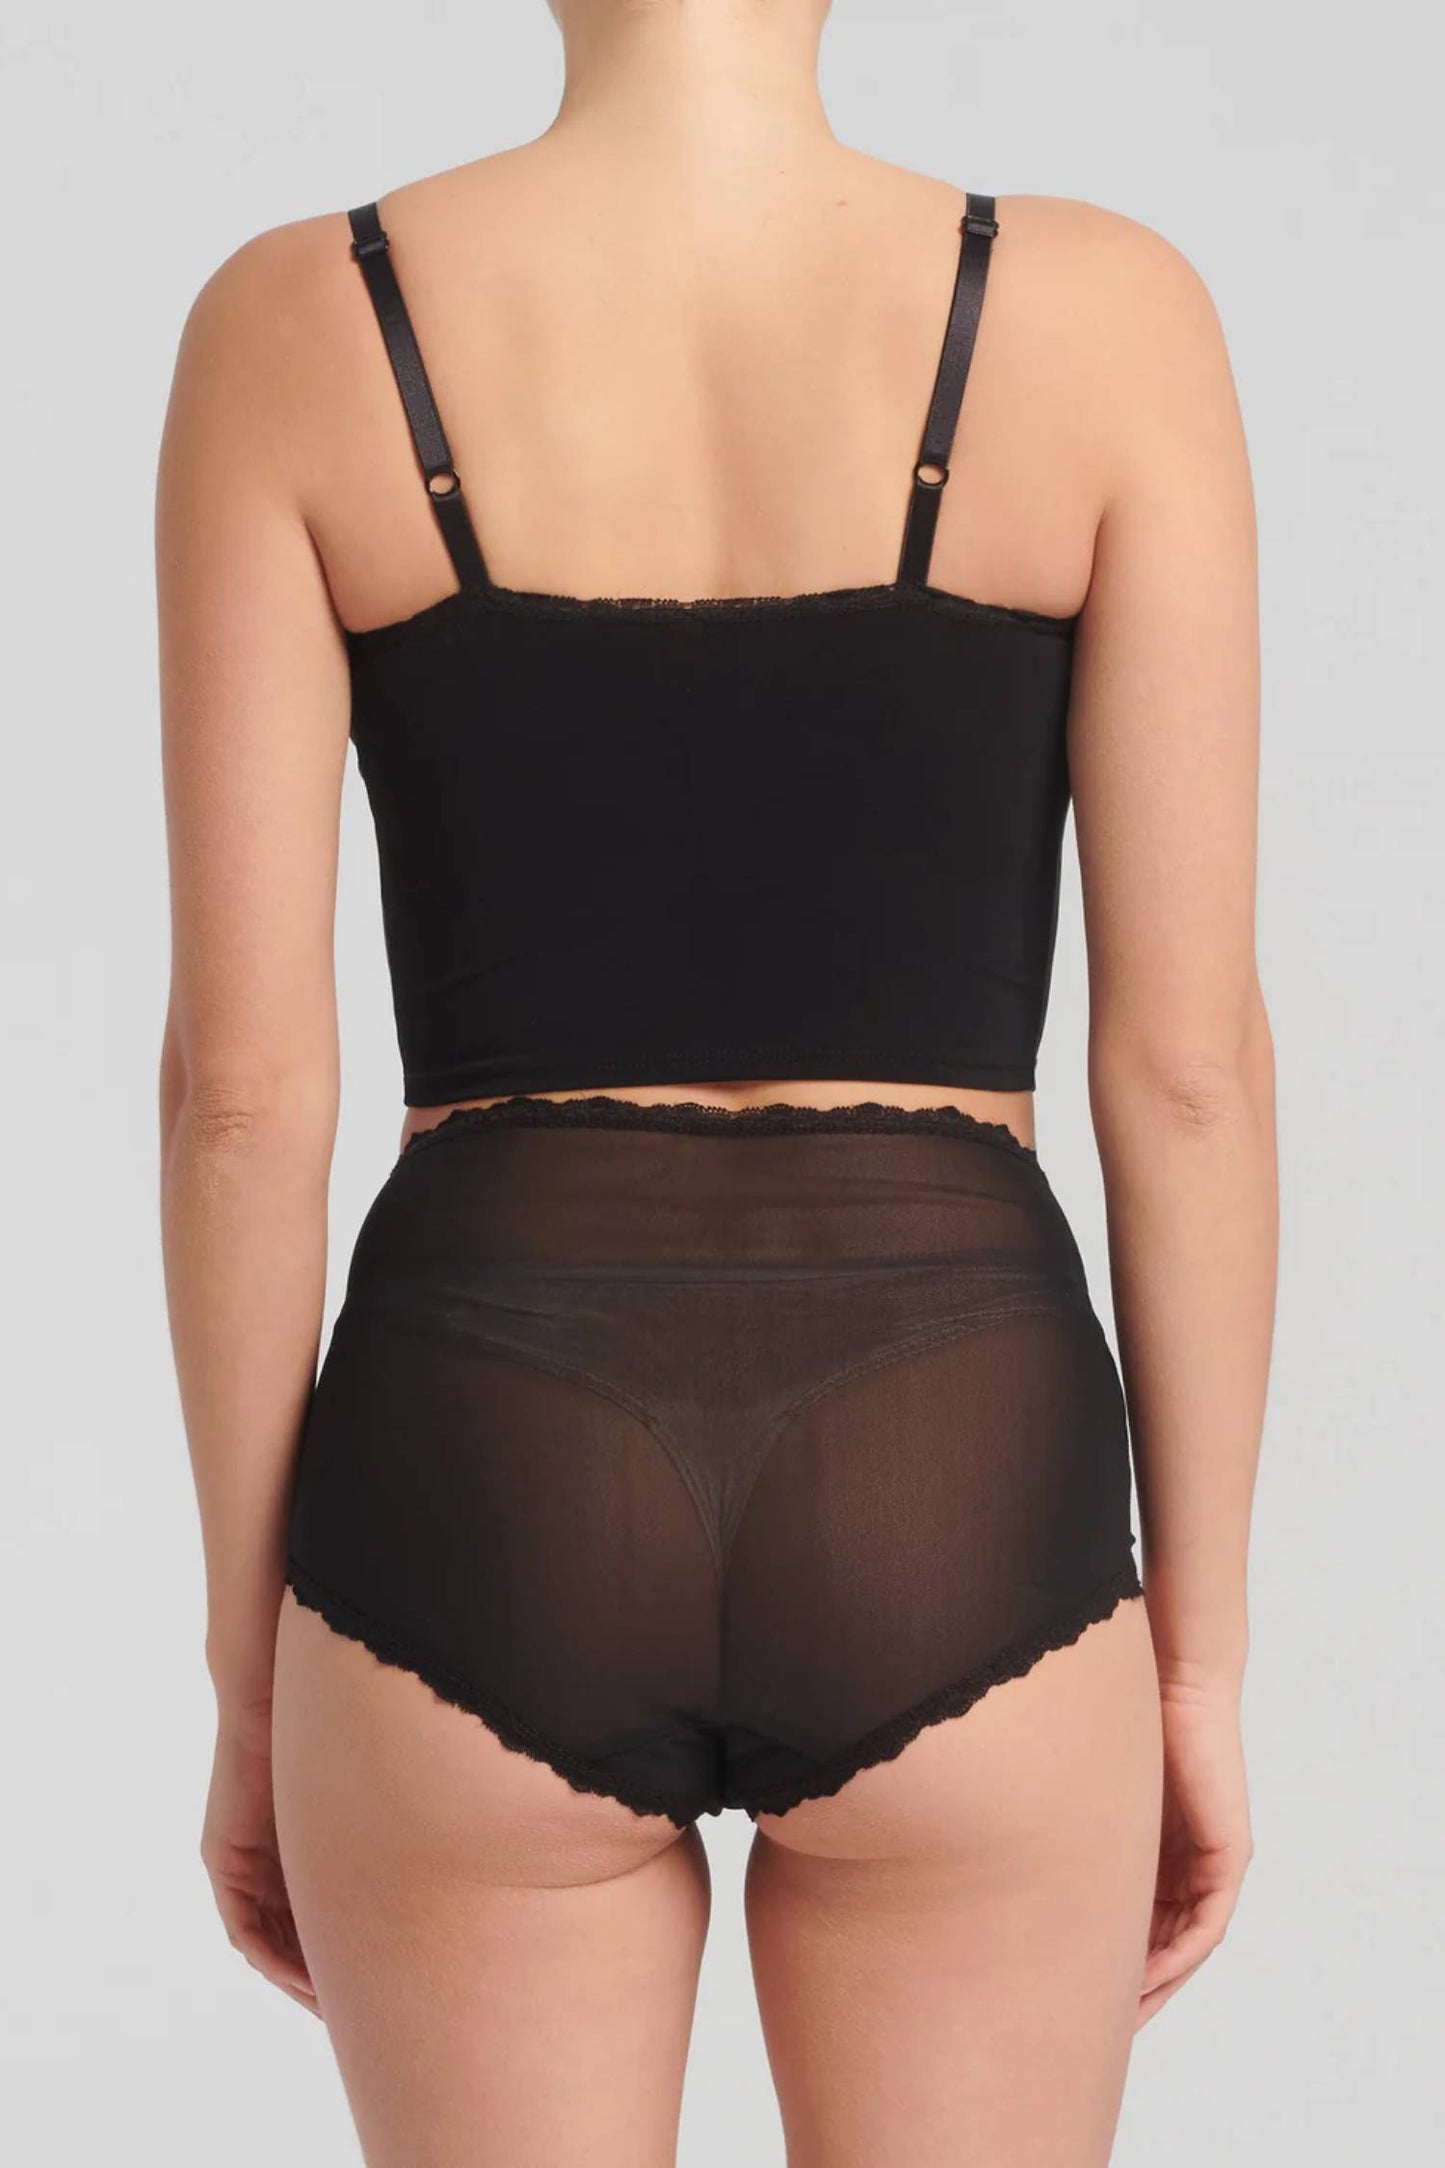 Raluca Brief by Kollontai, Green, back view, high-waisted panties, lace and mesh, sizes XS to XL, made in Montreal 